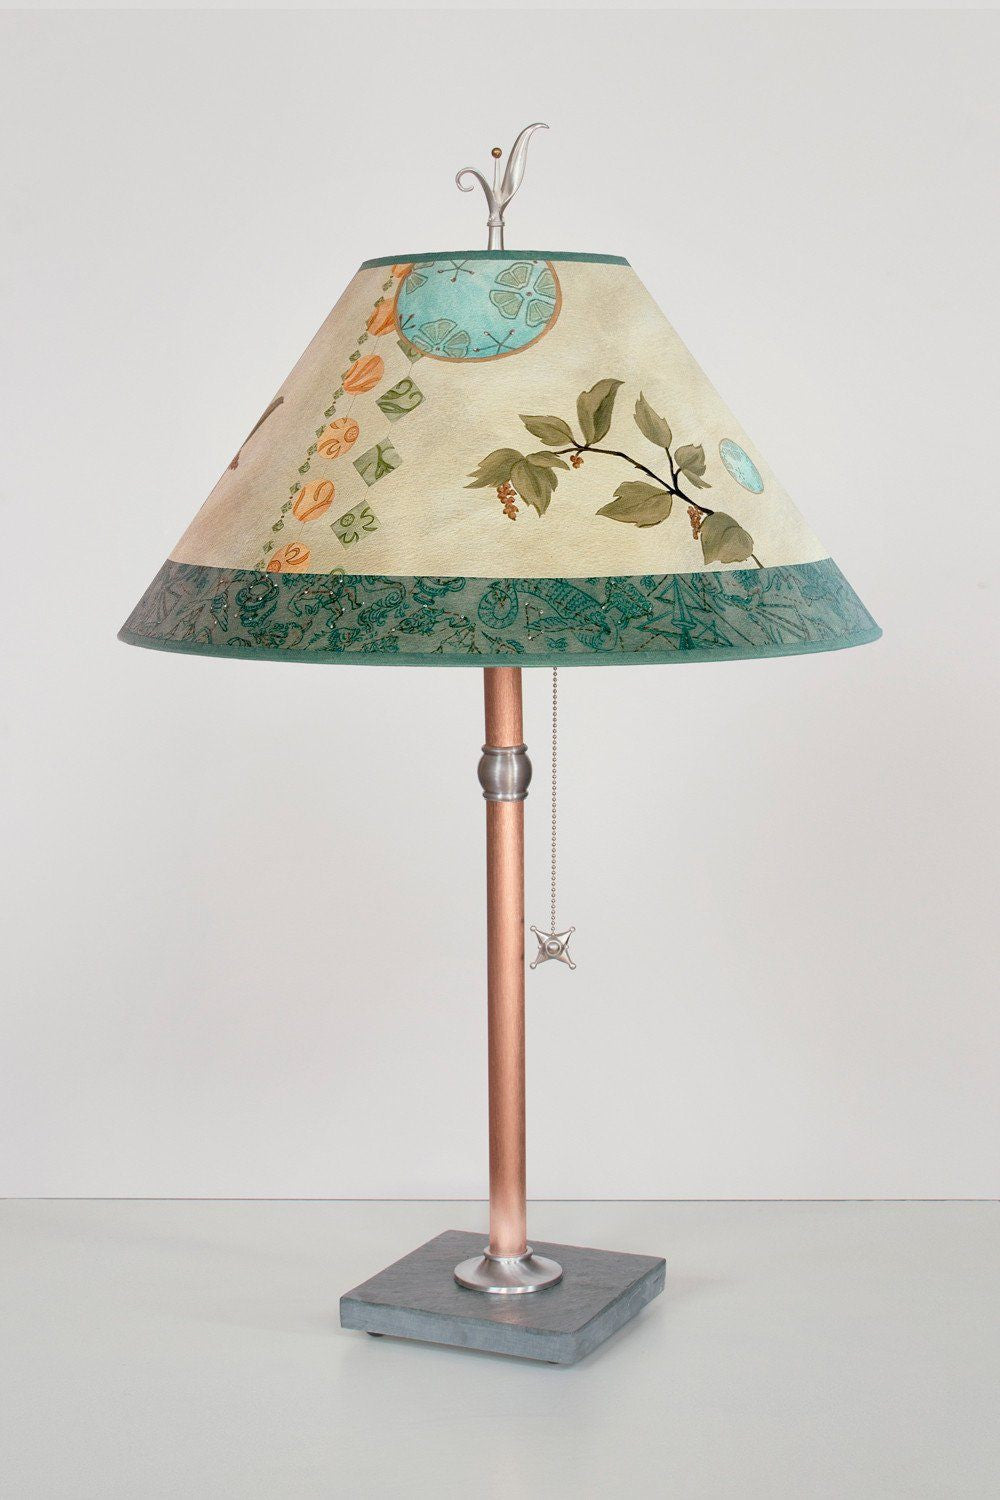 Janna Ugone & Co Table Lamps Copper Table Lamp with Large Conical Shade in Celestial Leaf